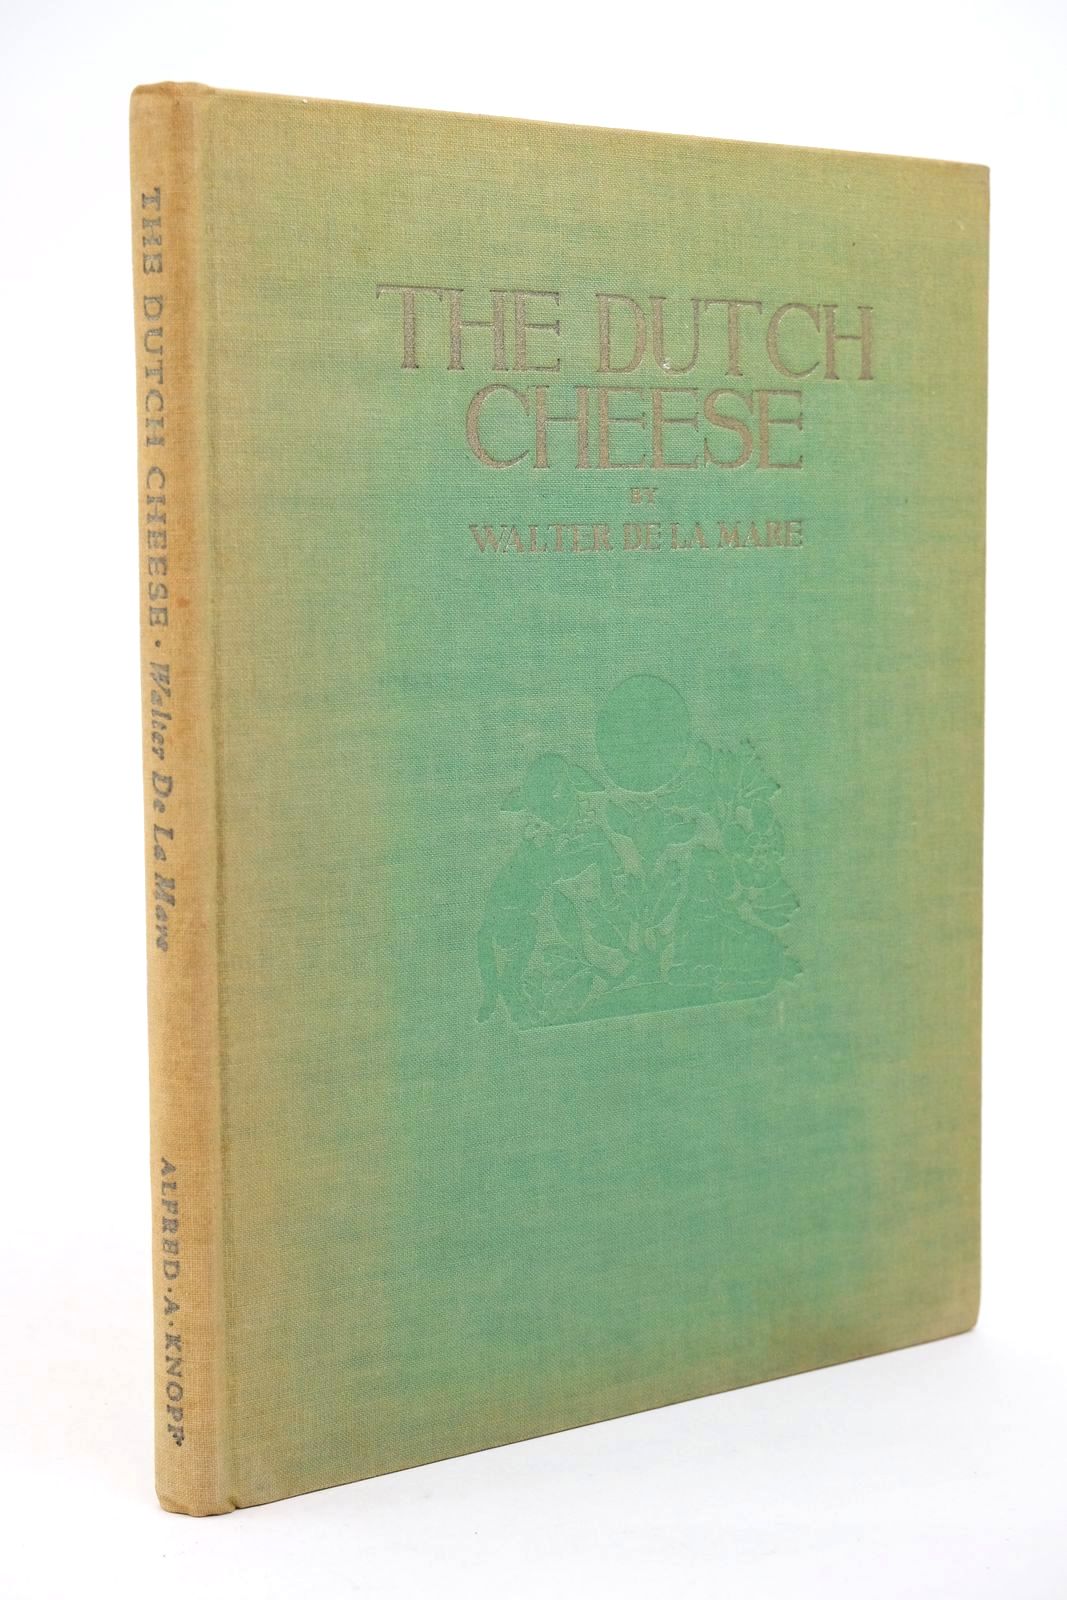 Photo of THE DUTCH CHEESE written by De La Mare, Walter illustrated by Lathrop, Dorothy P. published by Alfred A. Knopf (STOCK CODE: 1322949)  for sale by Stella & Rose's Books